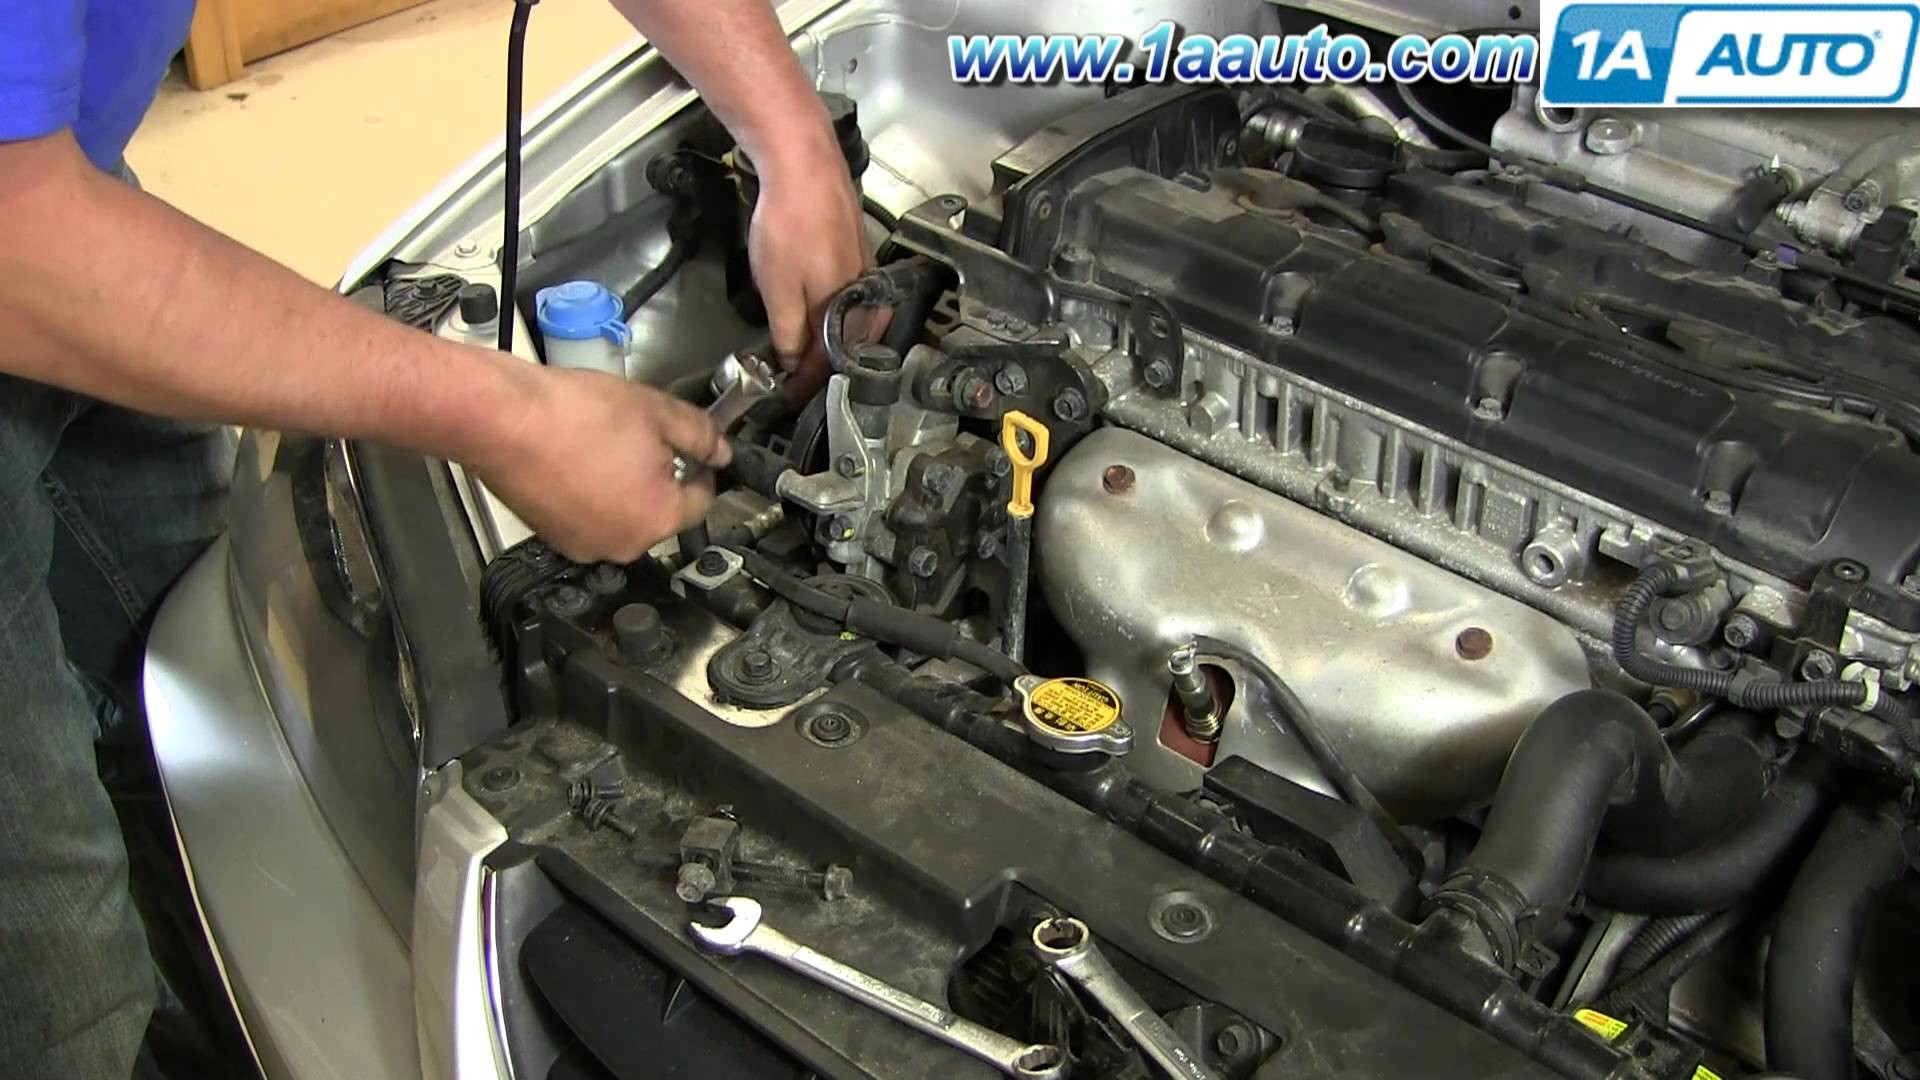 2009 Hyundai Accent Engine Diagram How to Install Replace Power Steering Belt 2001 06 Hyundai Elantra Of 2009 Hyundai Accent Engine Diagram